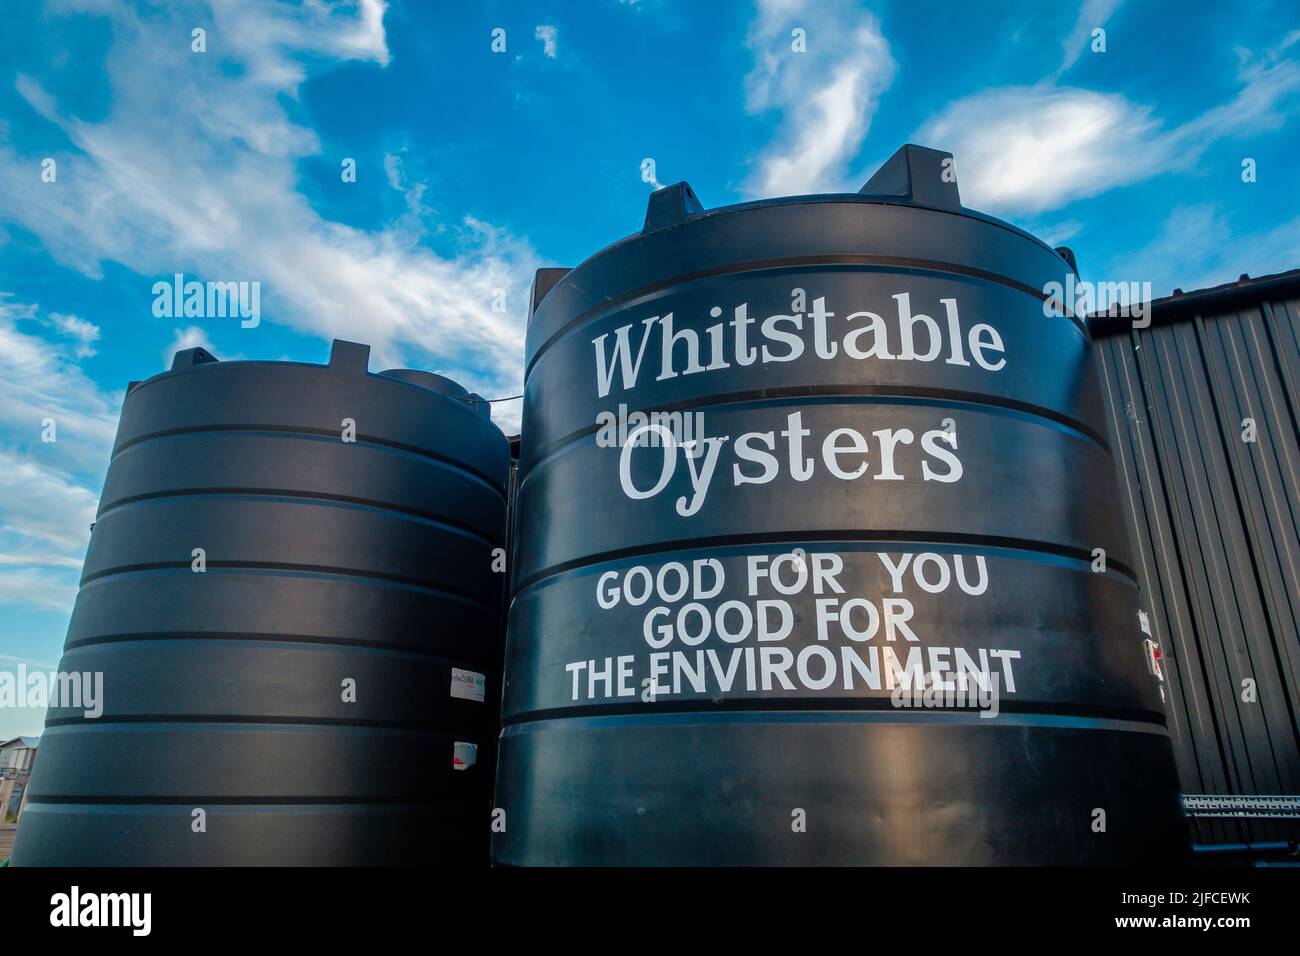 Whitstable Oysters, Water Tank, Whitstable Beach, Whitstable, Kent, bueno usted. Bueno para el medio ambiente Foto de stock